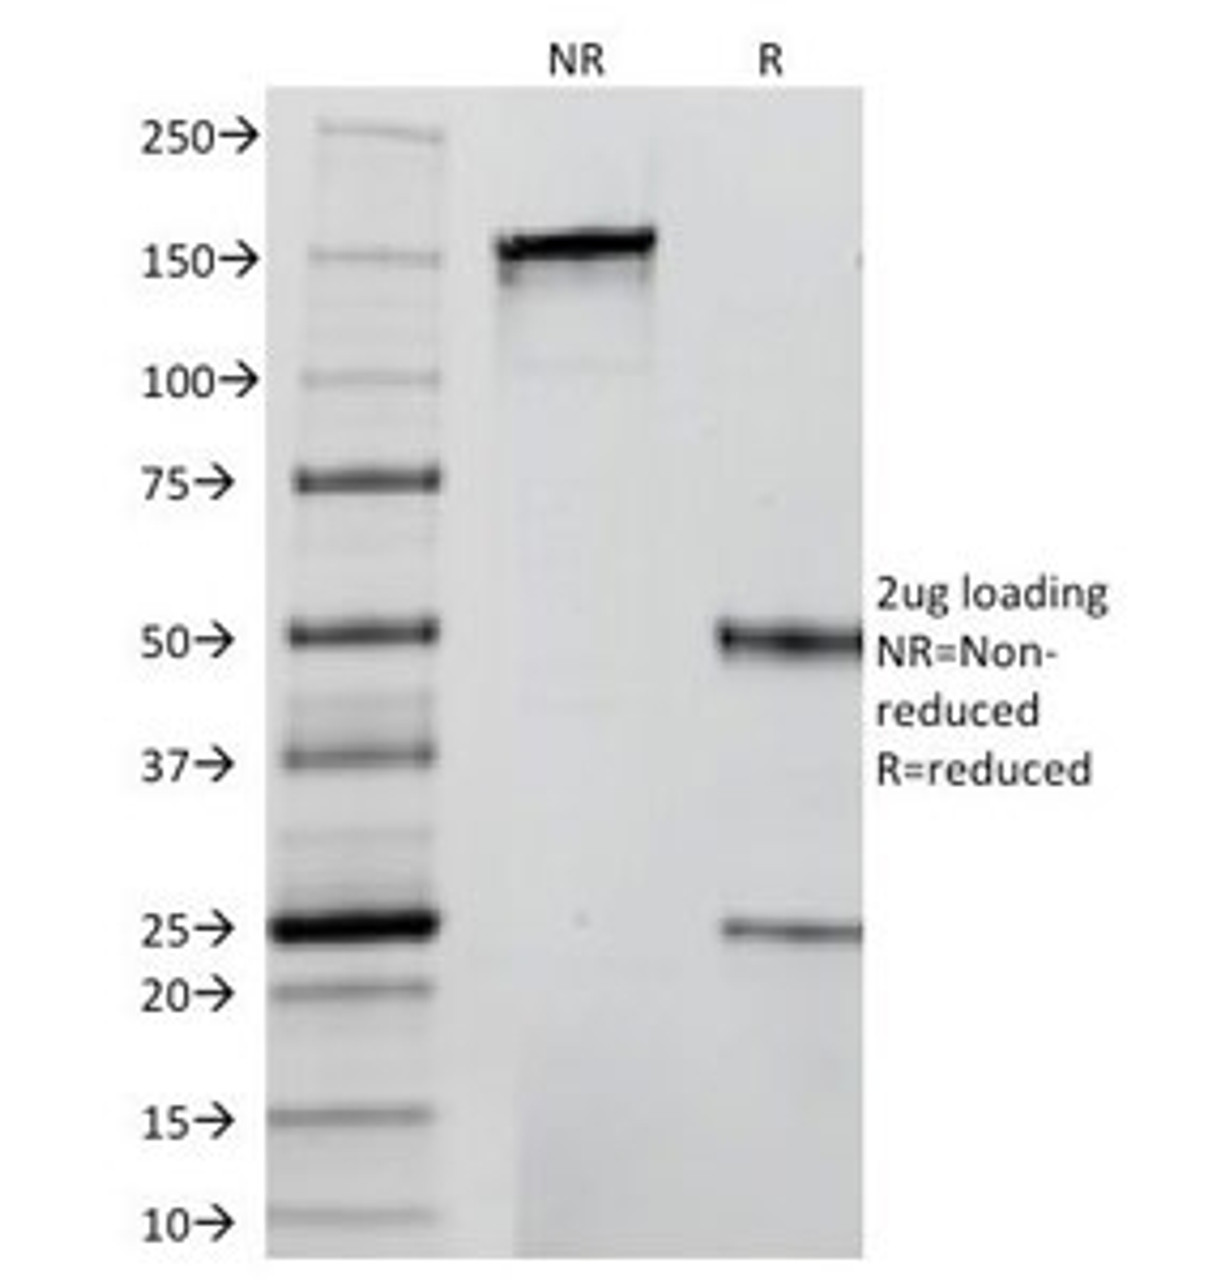 SDS-PAGE Analysis of Purified, BSA-Free Insulin Antibody (clone 2D11-H5 or INS05) . Confirmation of Integrity and Purity of the Antibody.